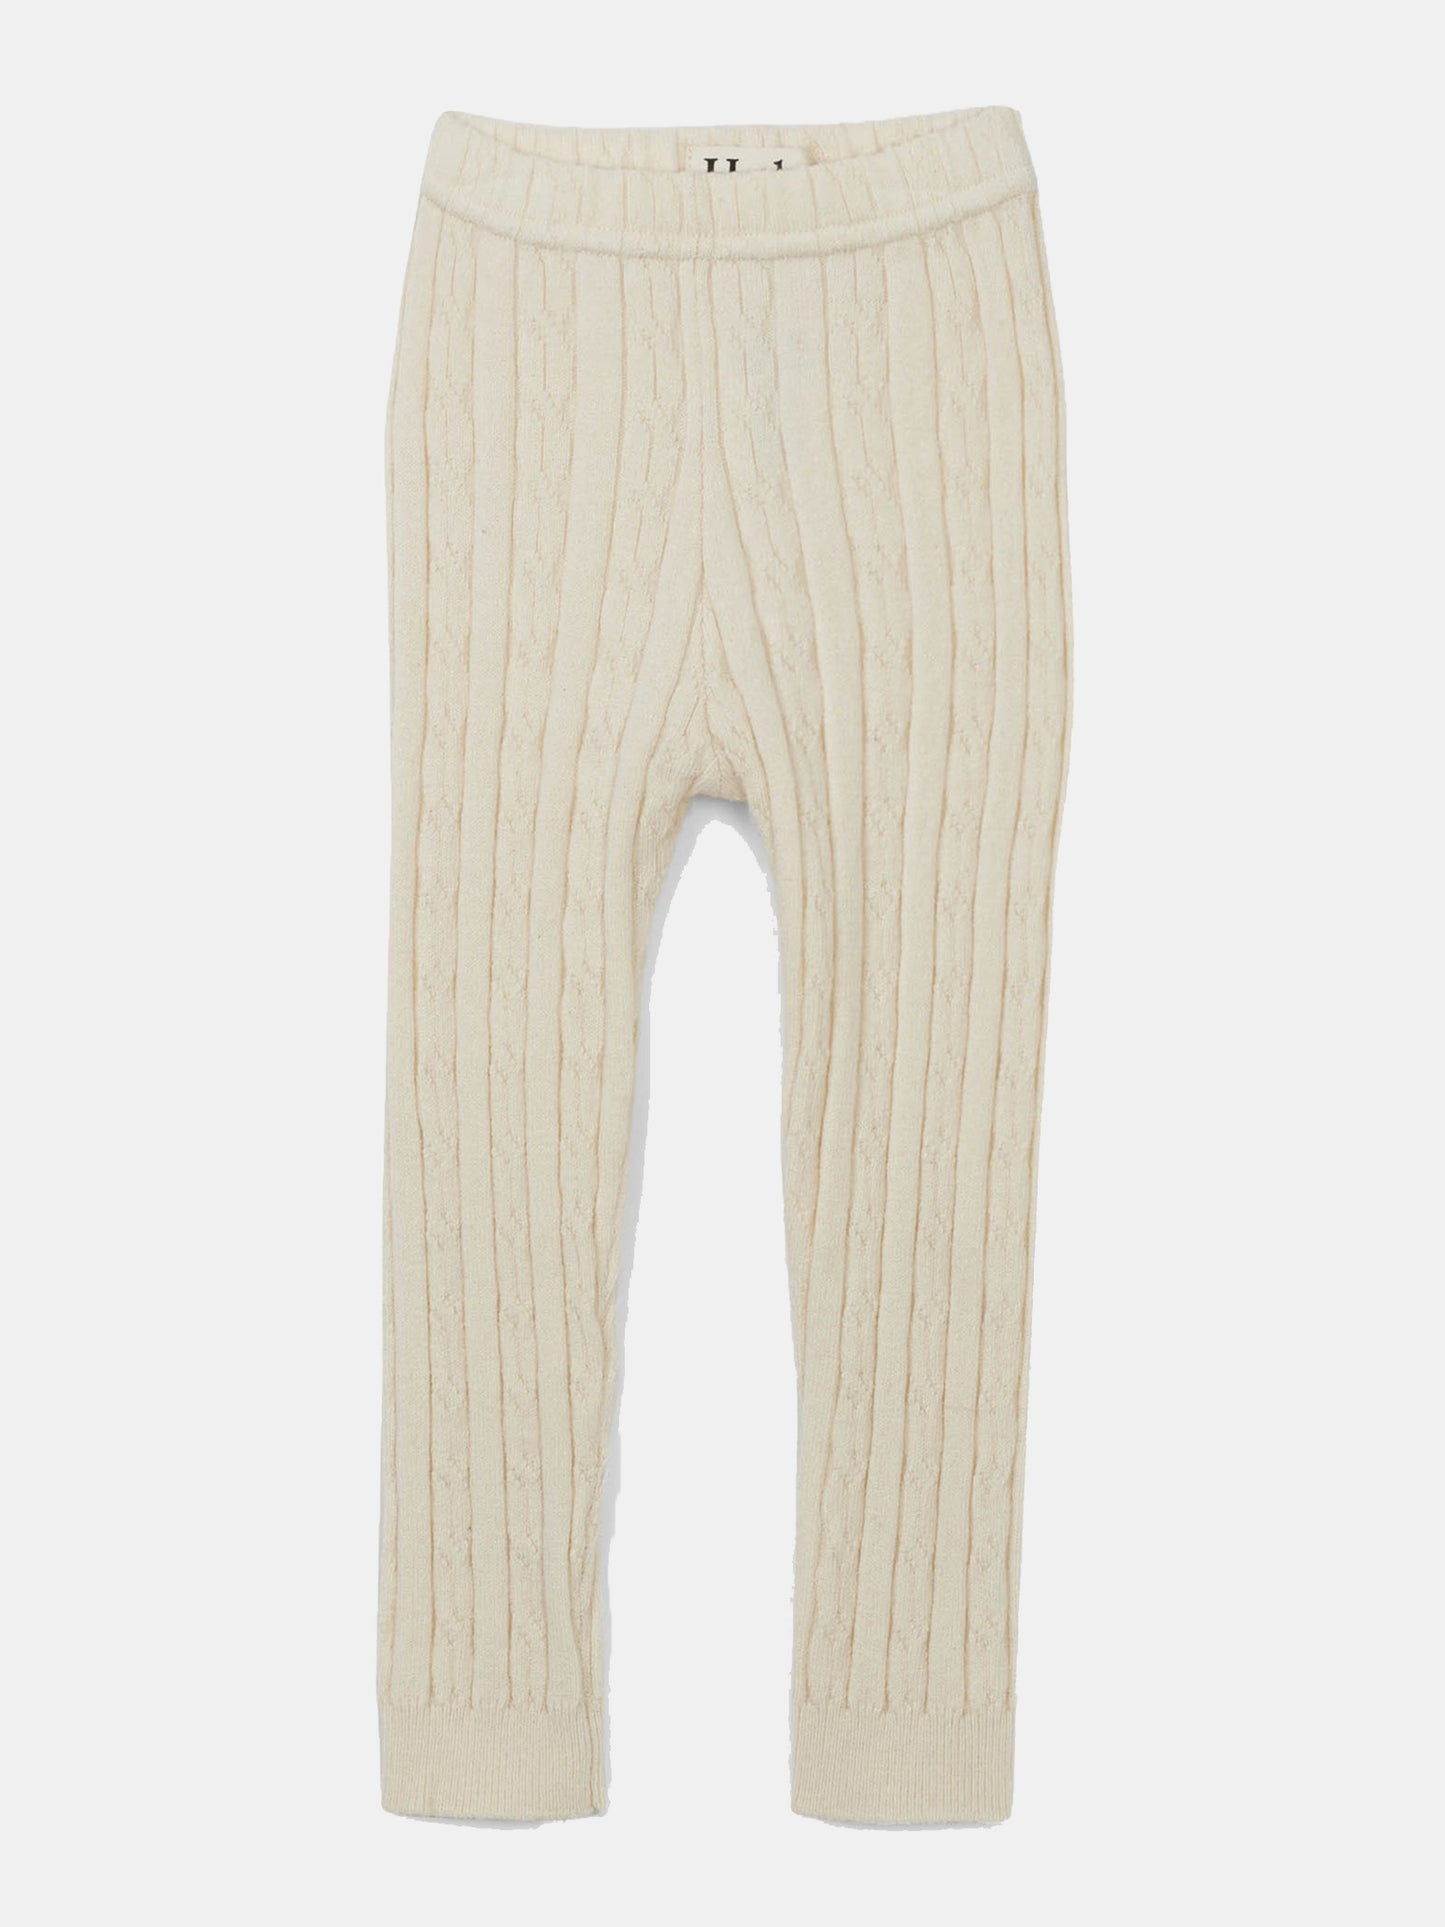 Hatley Girls' Cream Cable Knit Tight